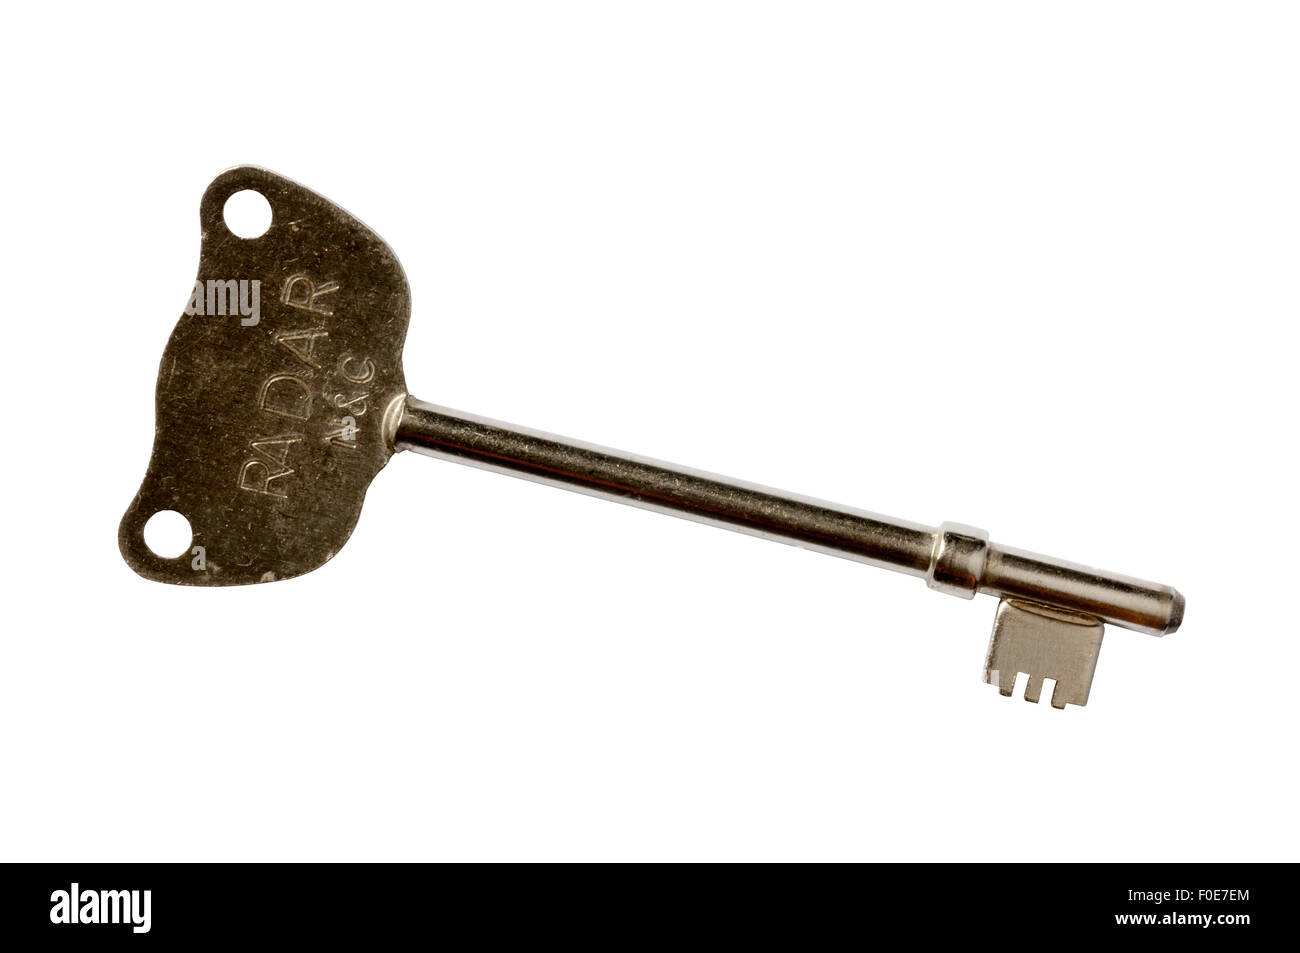 A disabled person's Radar key to open disabled toilets. Stock Photo